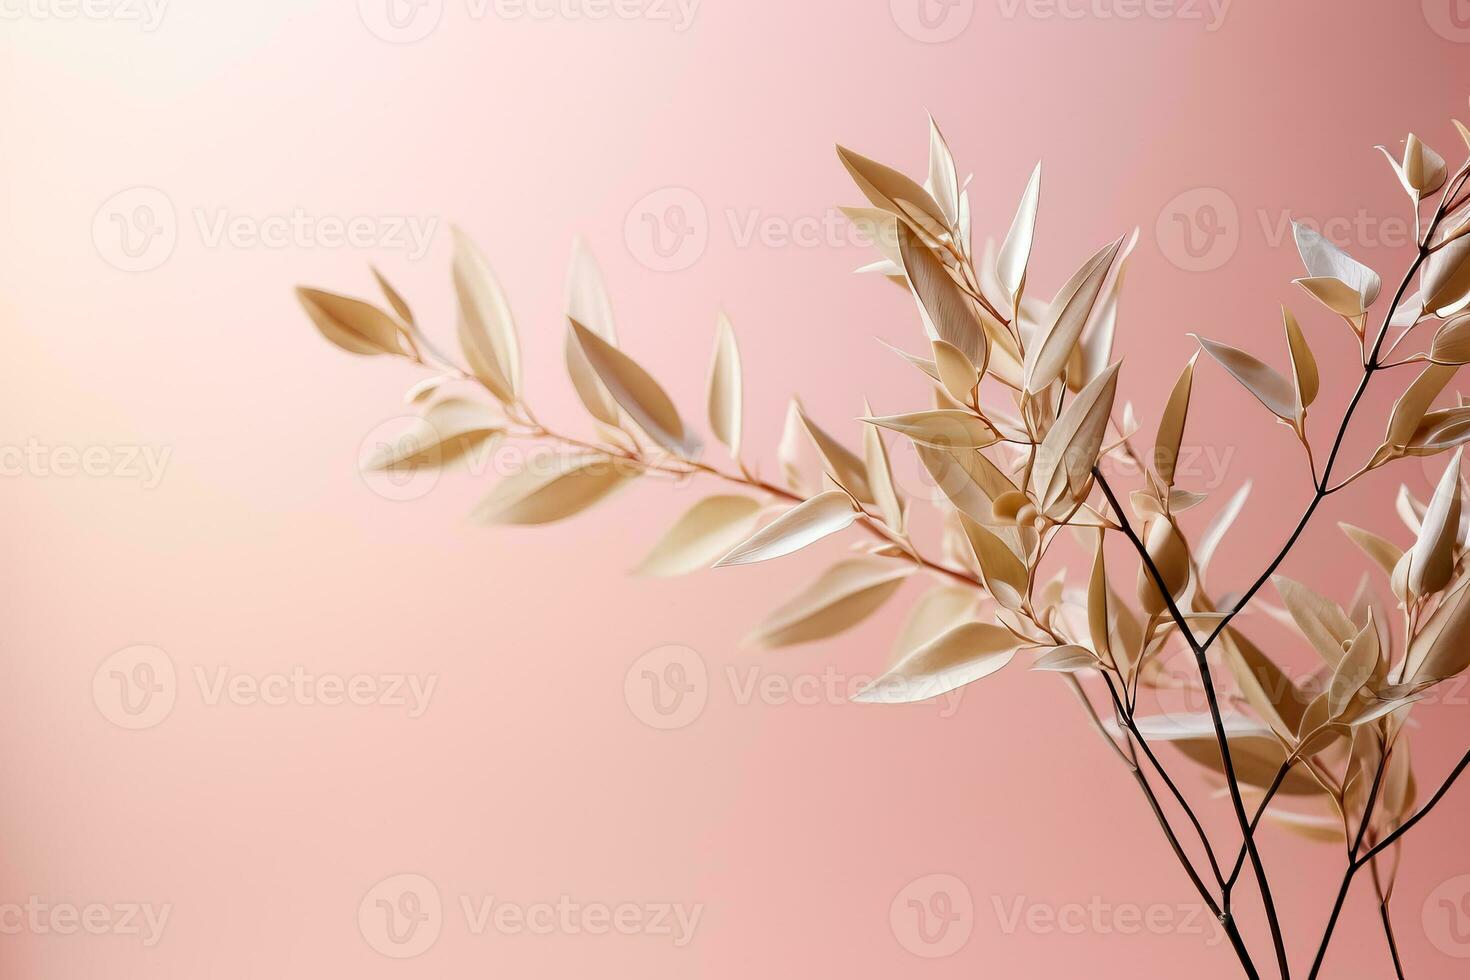 A close-up shot of delicate mistletoe leaves on a light blush pink background creating a subtle yet festive ambiance photo